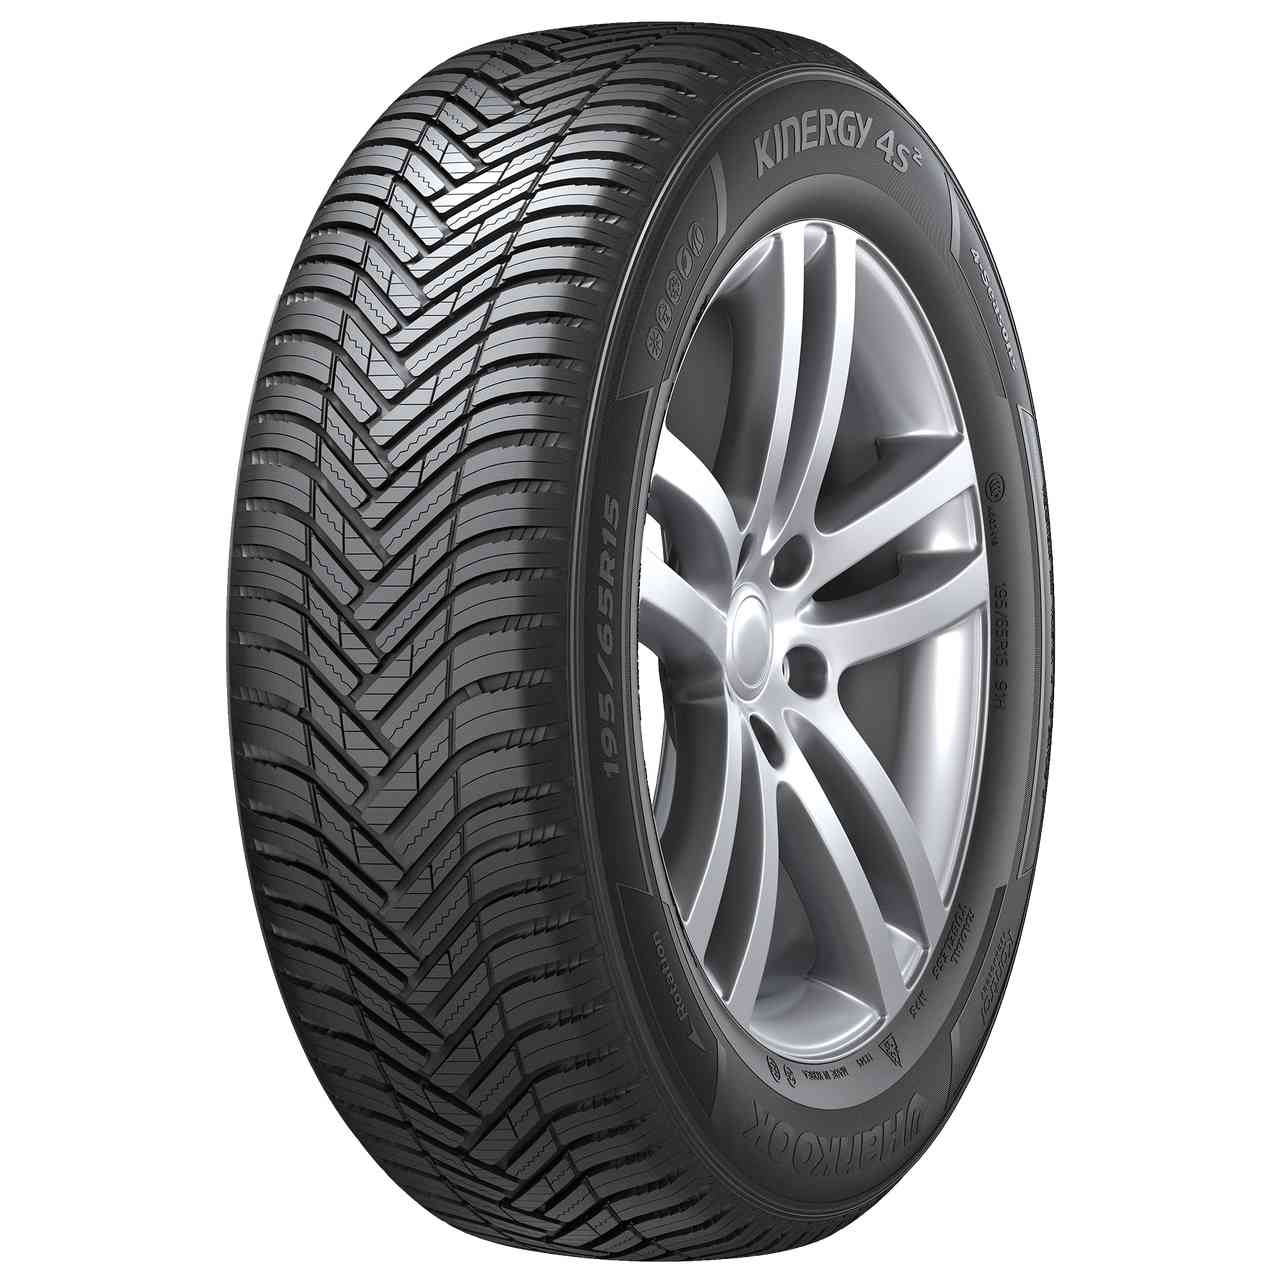 HANKOOK KINERGY 4S 2 (H750) 195/55R16 91H BSW XL